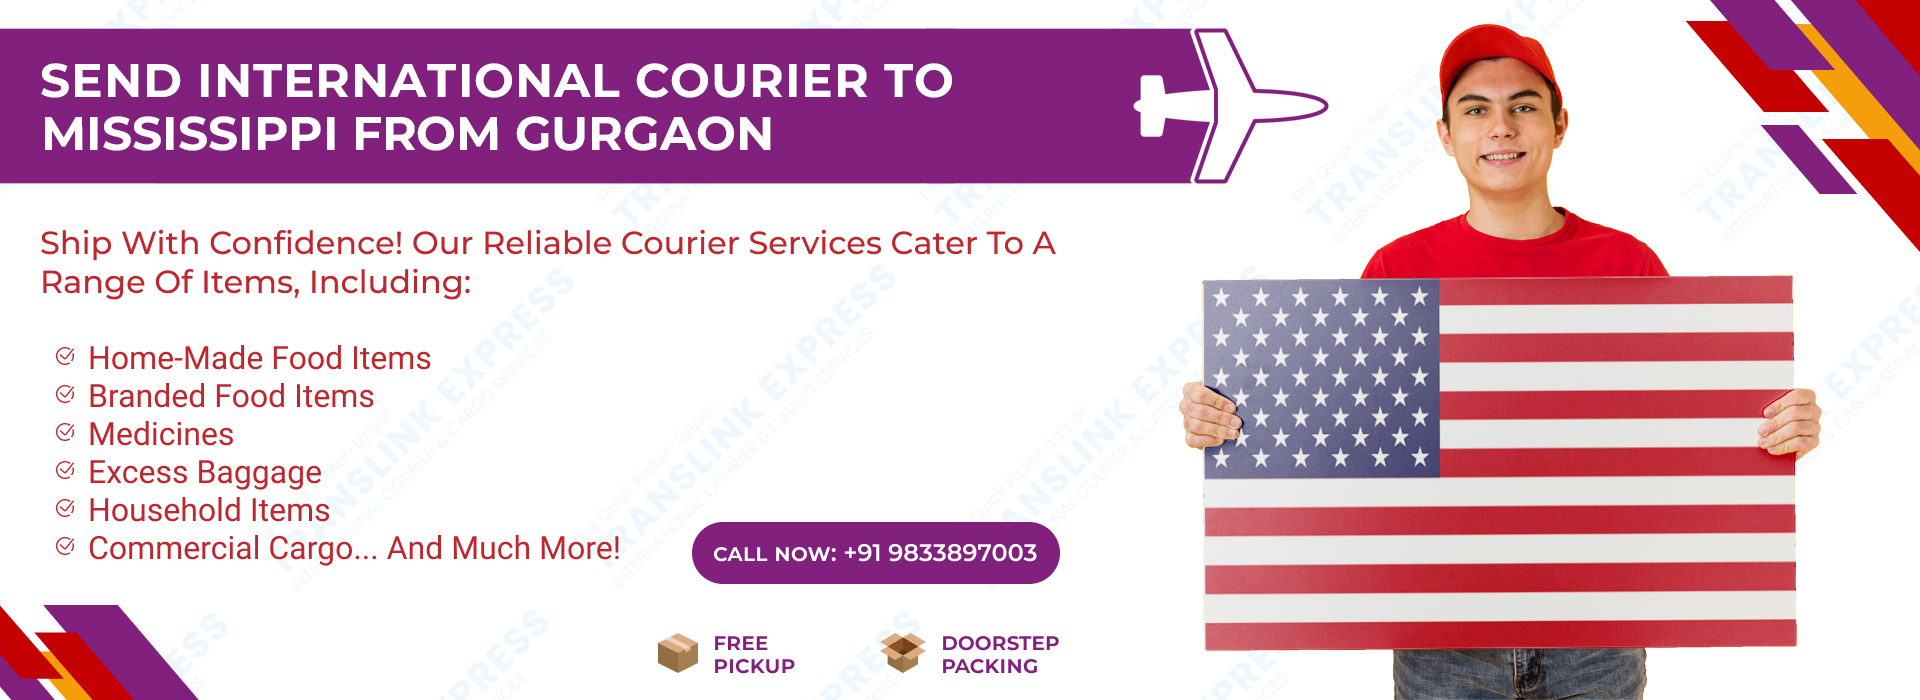 Courier to Mississippi From Gurgaon